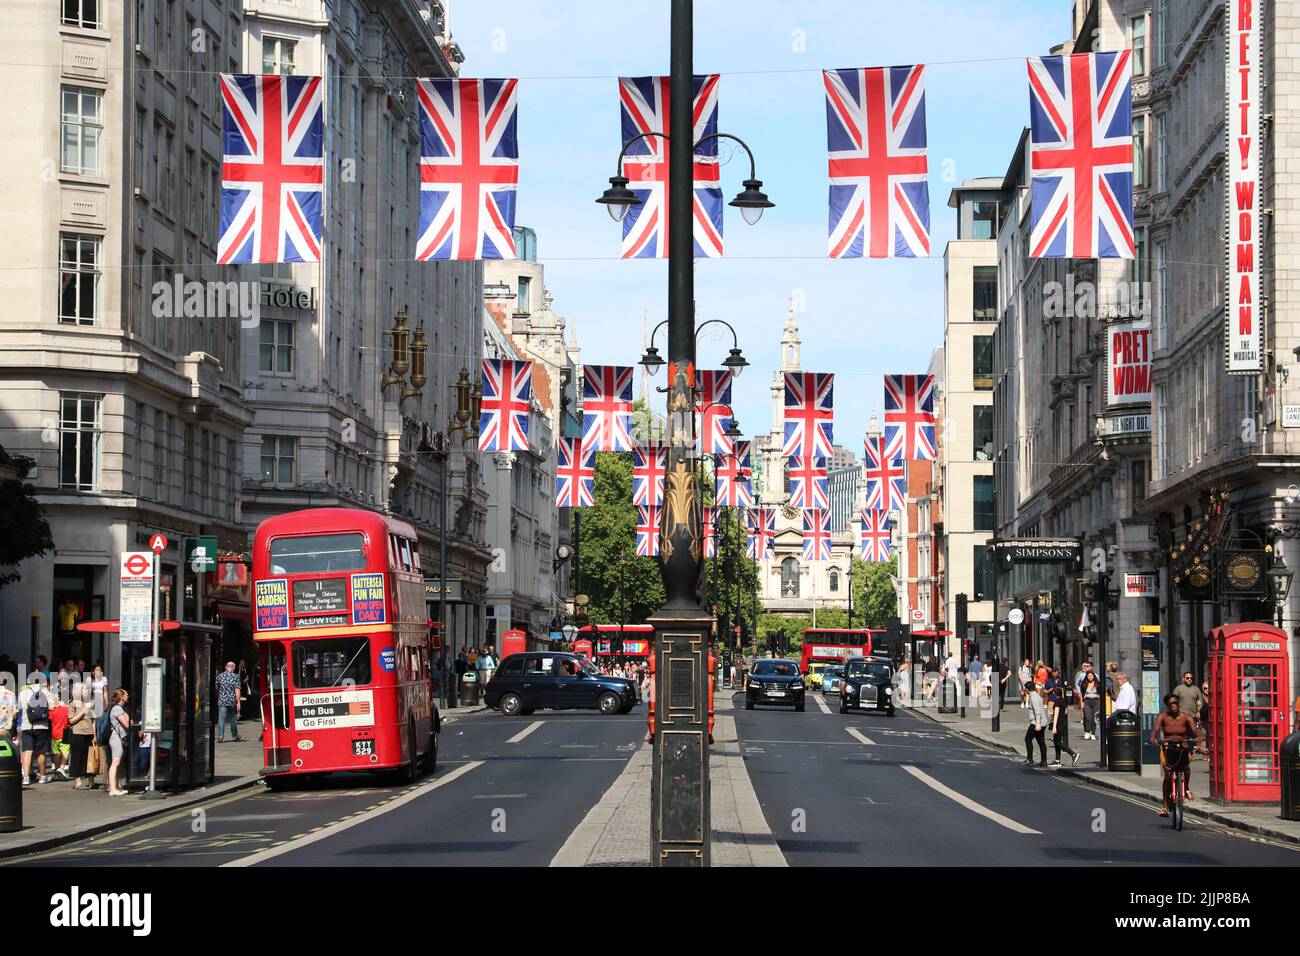 THE STRAND IN LONDON WITH RED DOUBLE DECKER BUS Stock Photo